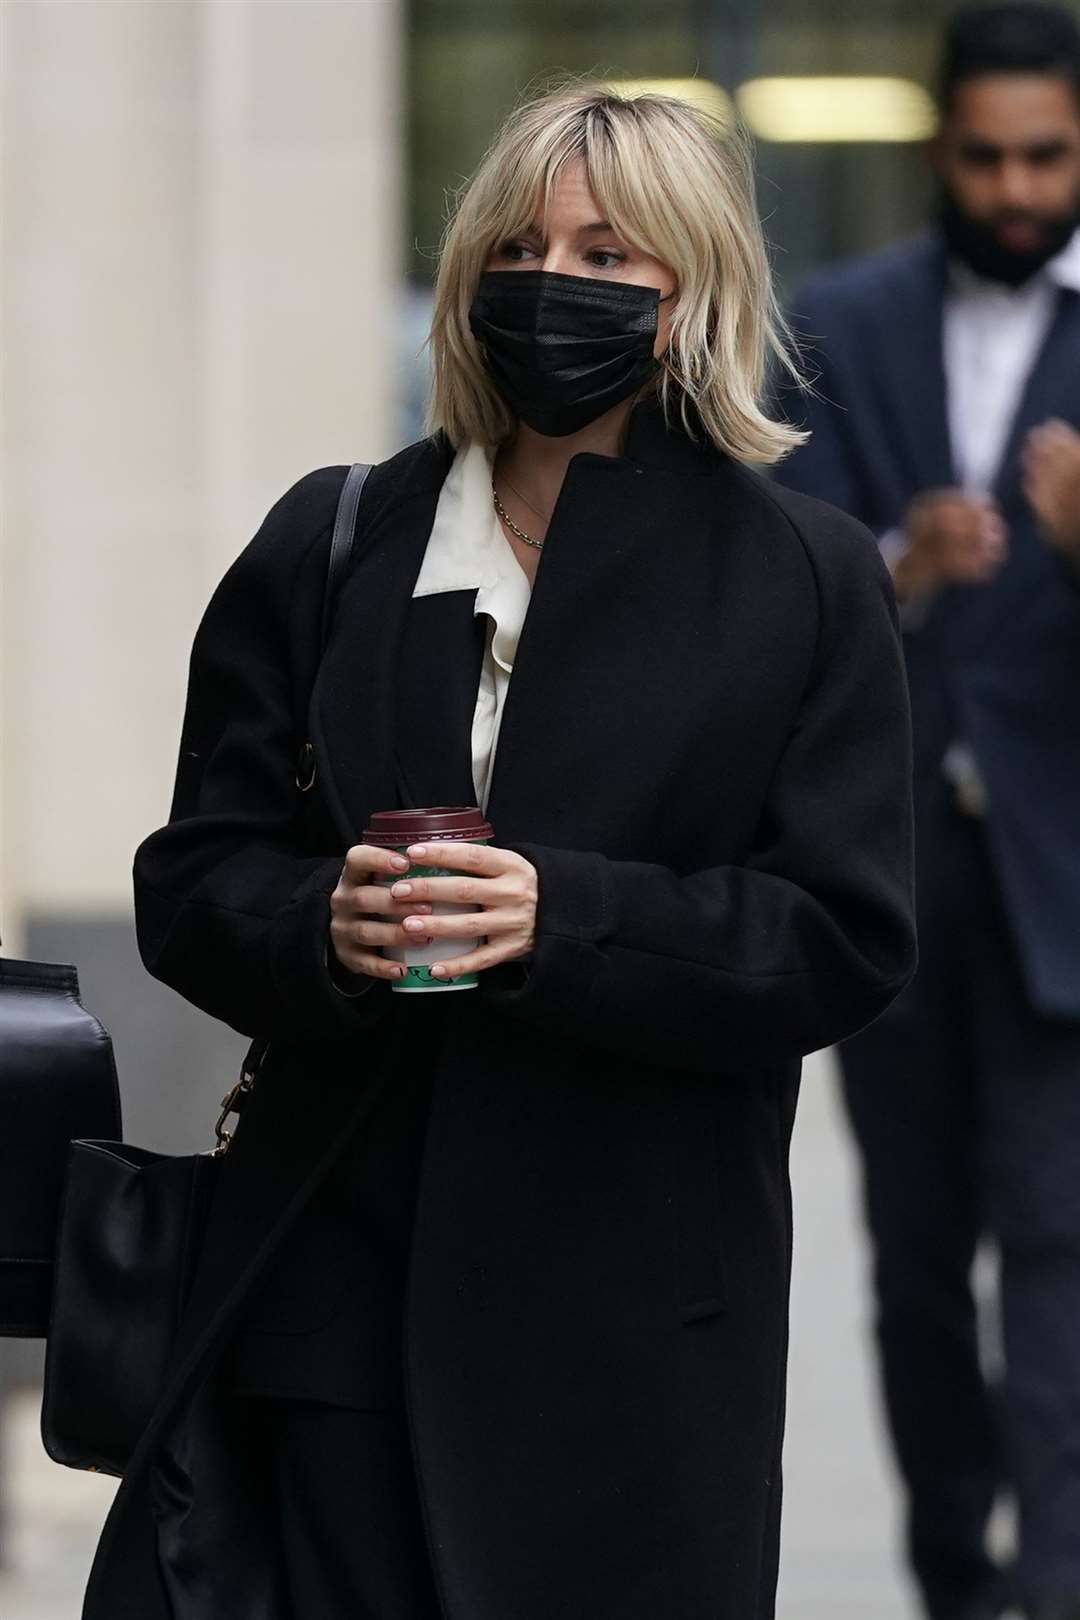 Sienna Miller outside court earlier on Wednesday (PA)